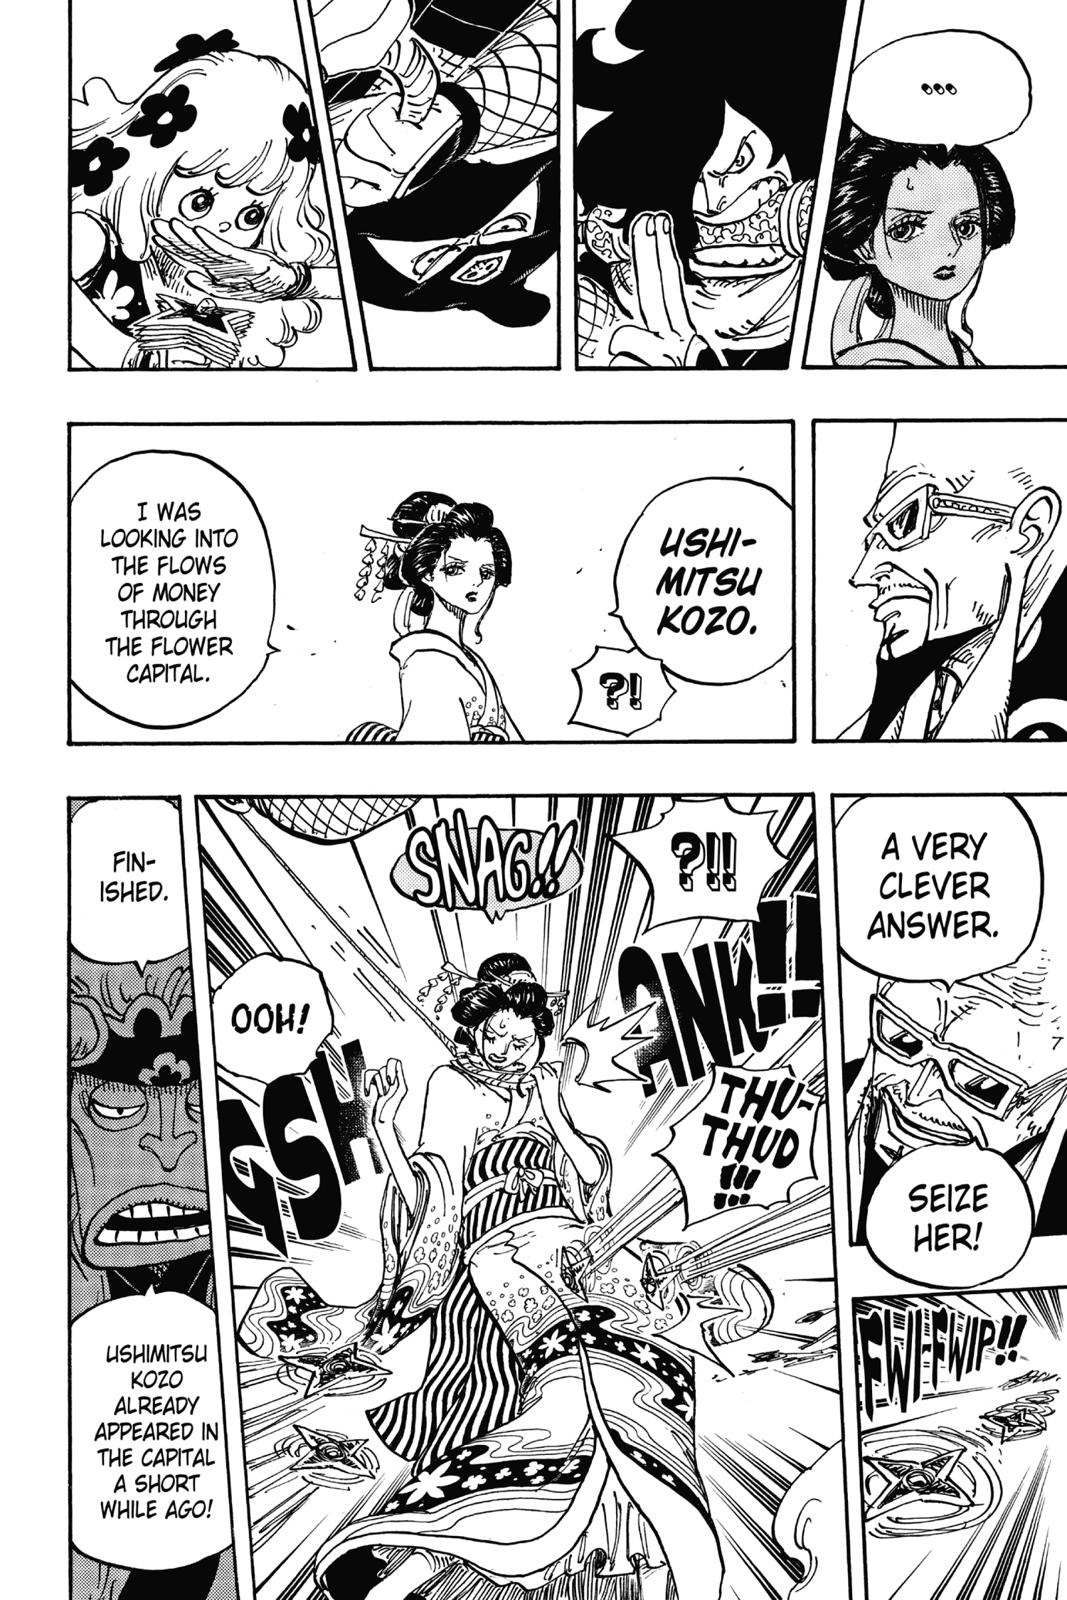 One Piece Chapter 932 One Piece Manga Online